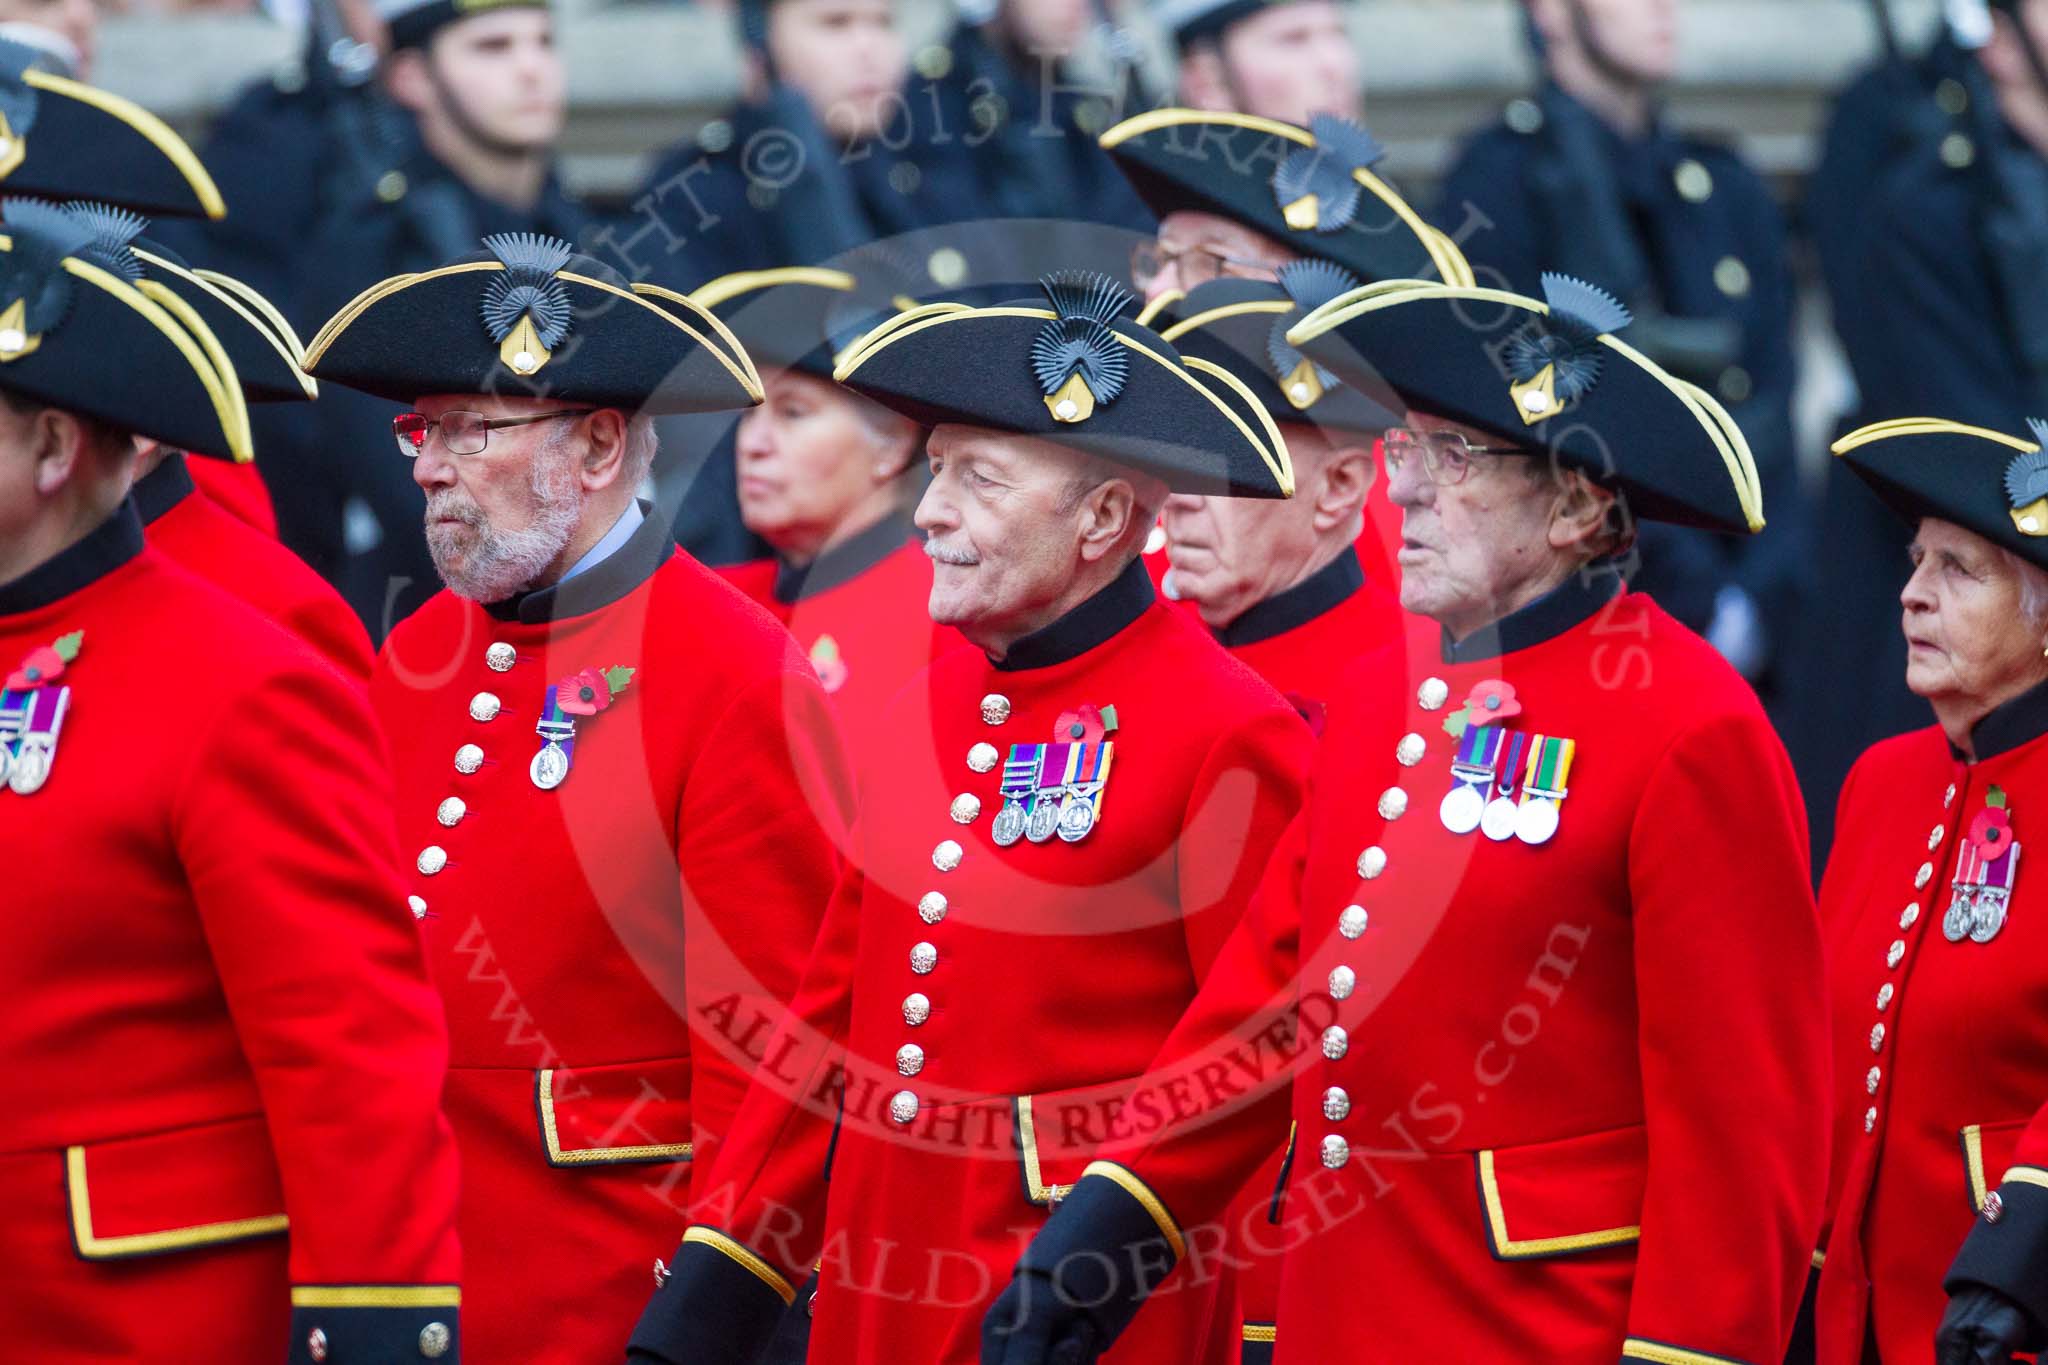 Remembrance Sunday at the Cenotaph 2015: Group B43, Royal Hospital Chelsea.
Cenotaph, Whitehall, London SW1,
London,
Greater London,
United Kingdom,
on 08 November 2015 at 11:45, image #352